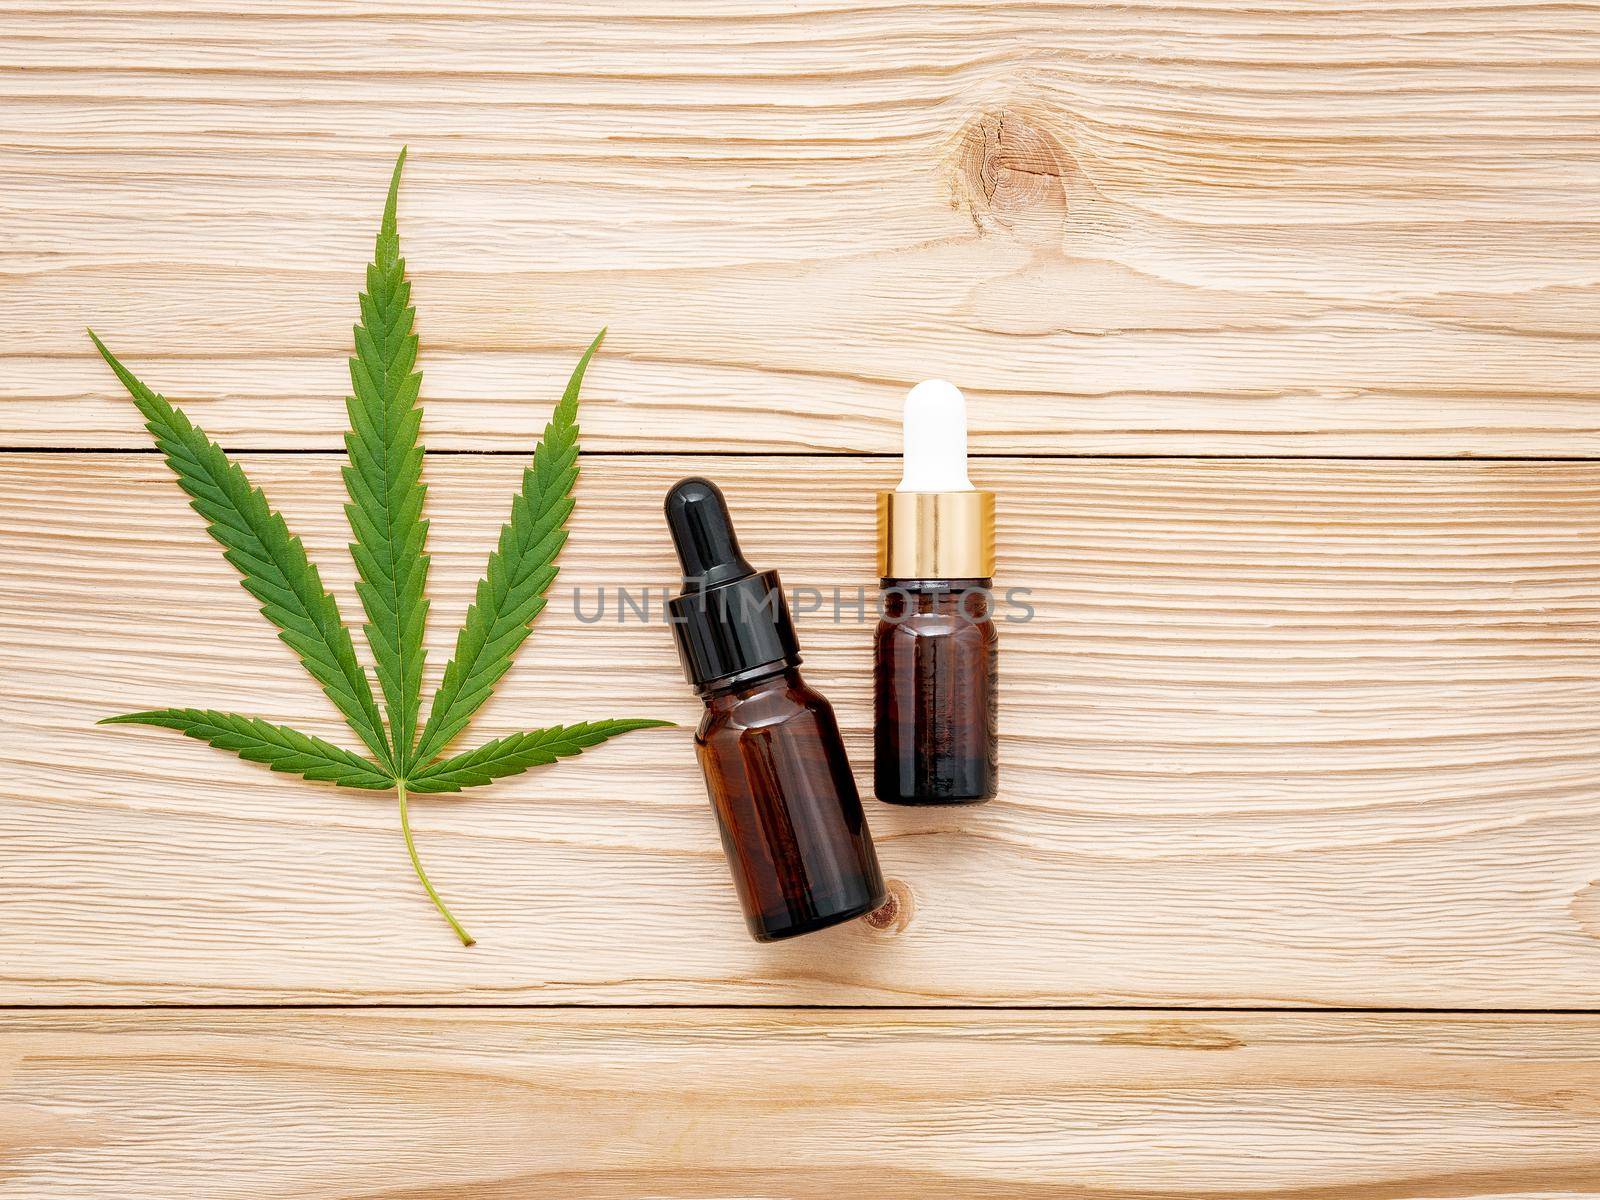 Glass bottle of cannabis oil and hemp leaves set up  on wooden background.